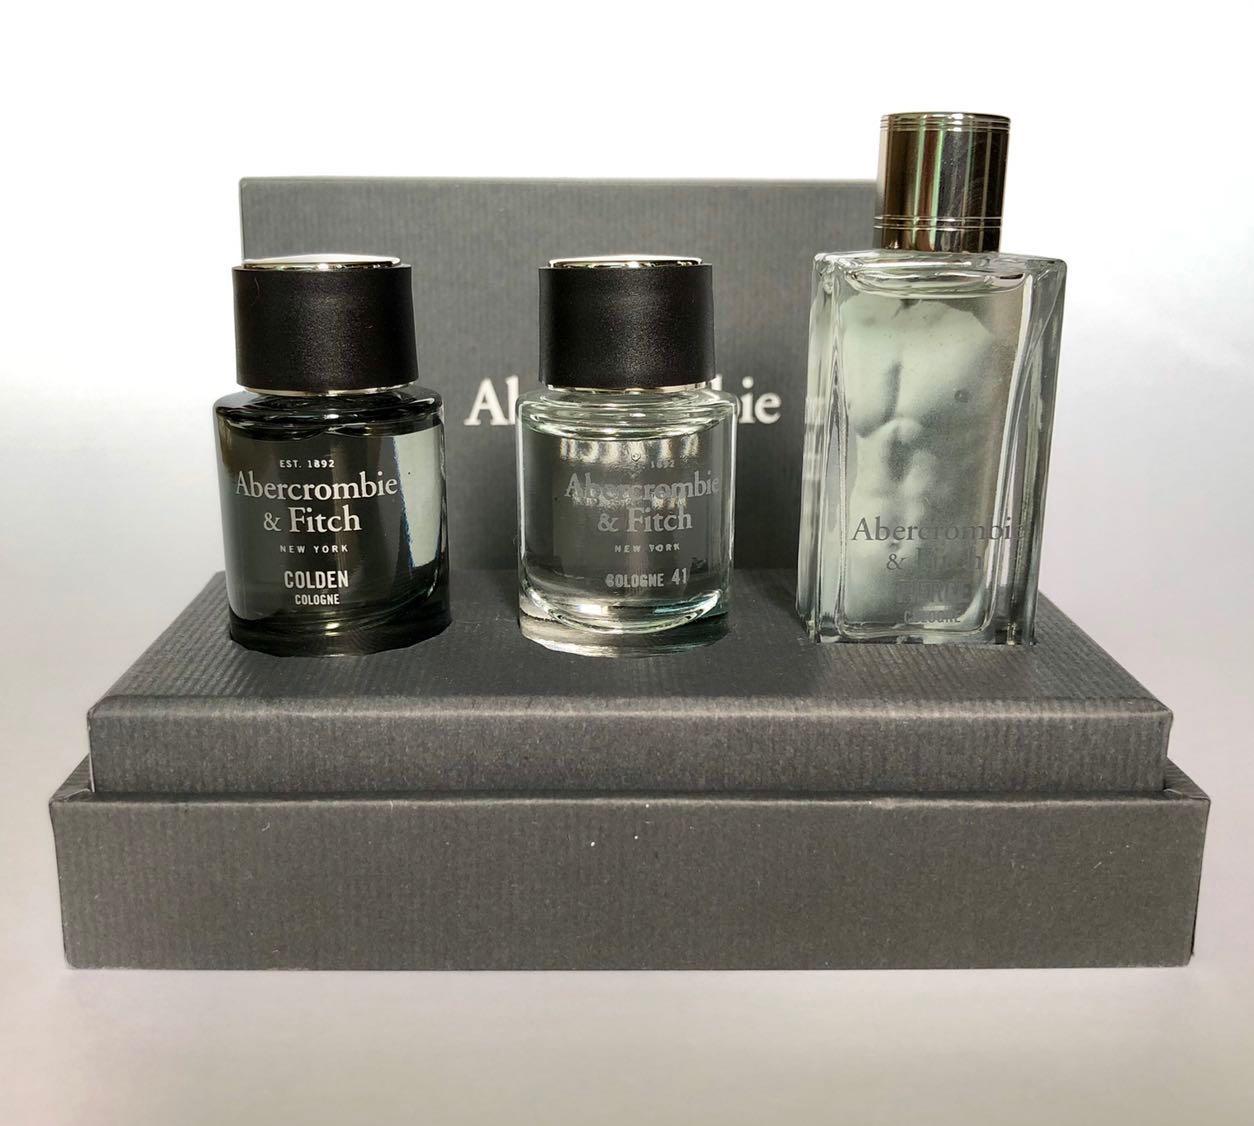 abercrombie fitch cologne 41